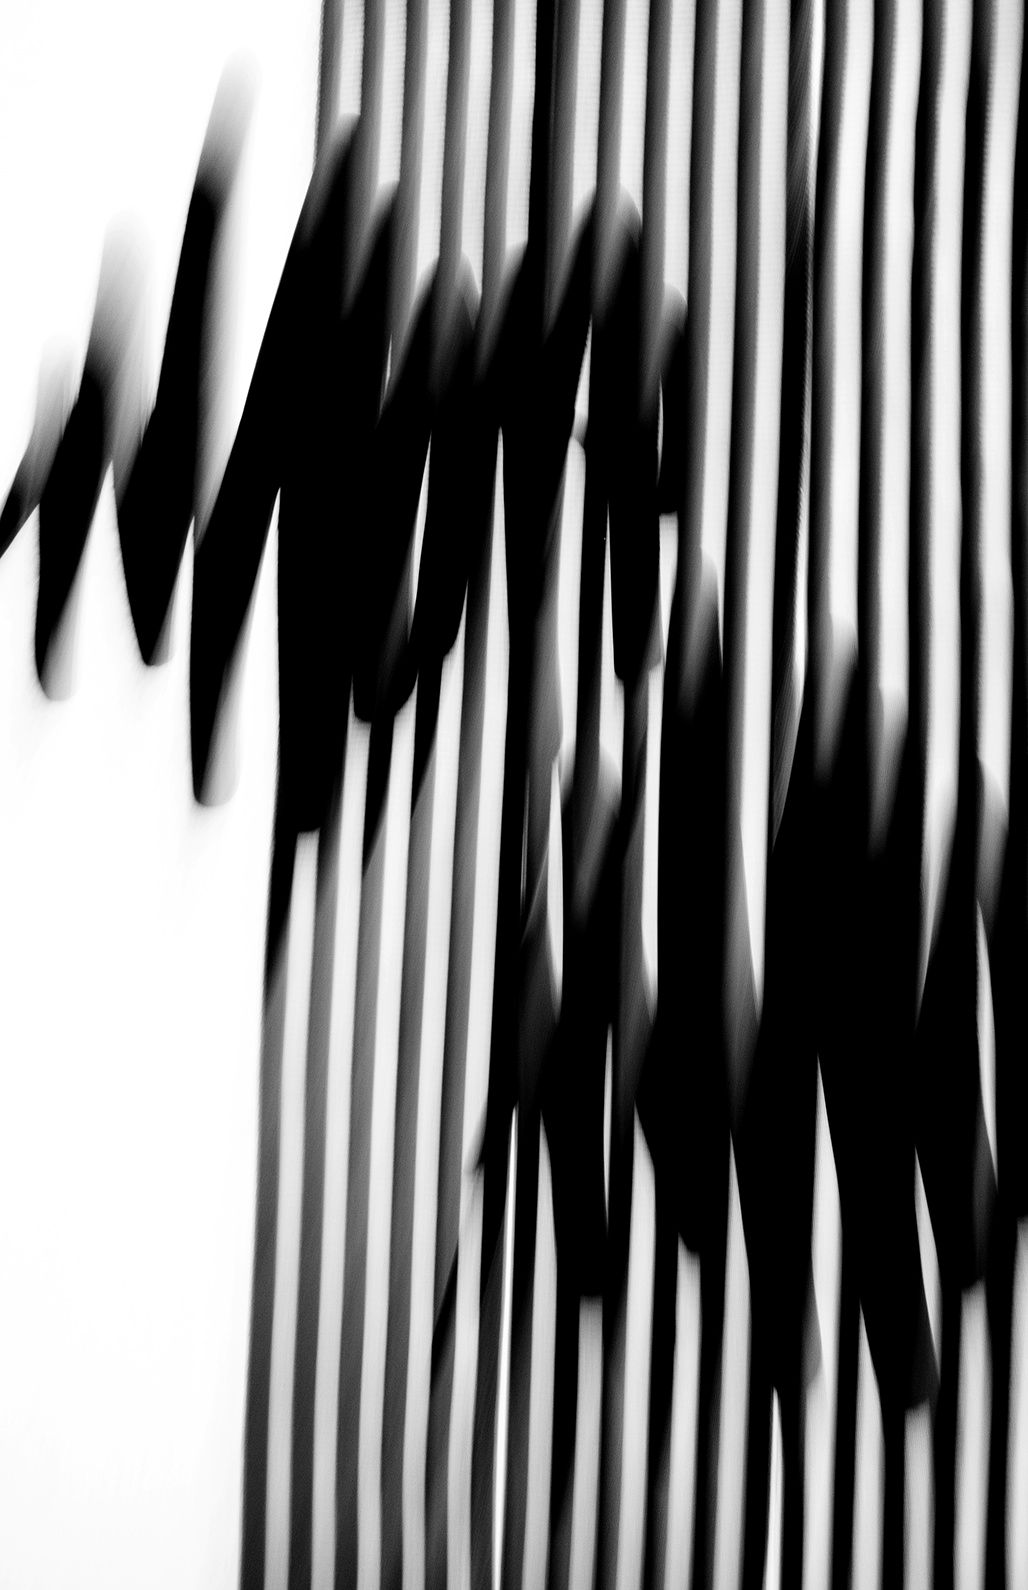 Untitled, M. Doodles 2, 2014, Black and White Abstract Photography, Shirine Gill